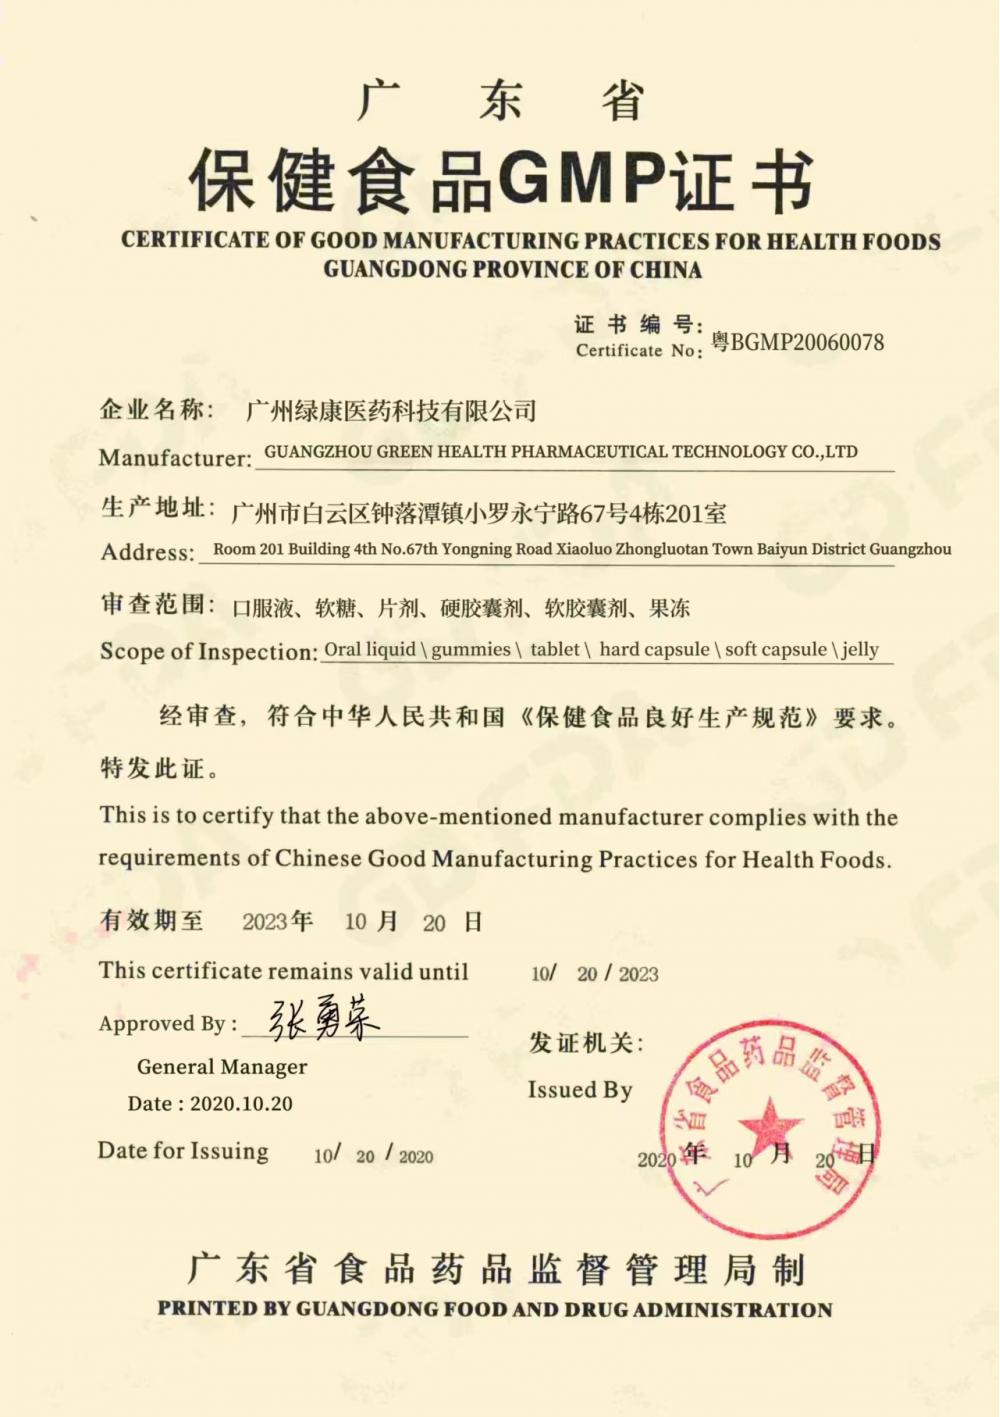 certificate of good manufacturing practices for health foods guandong province of china